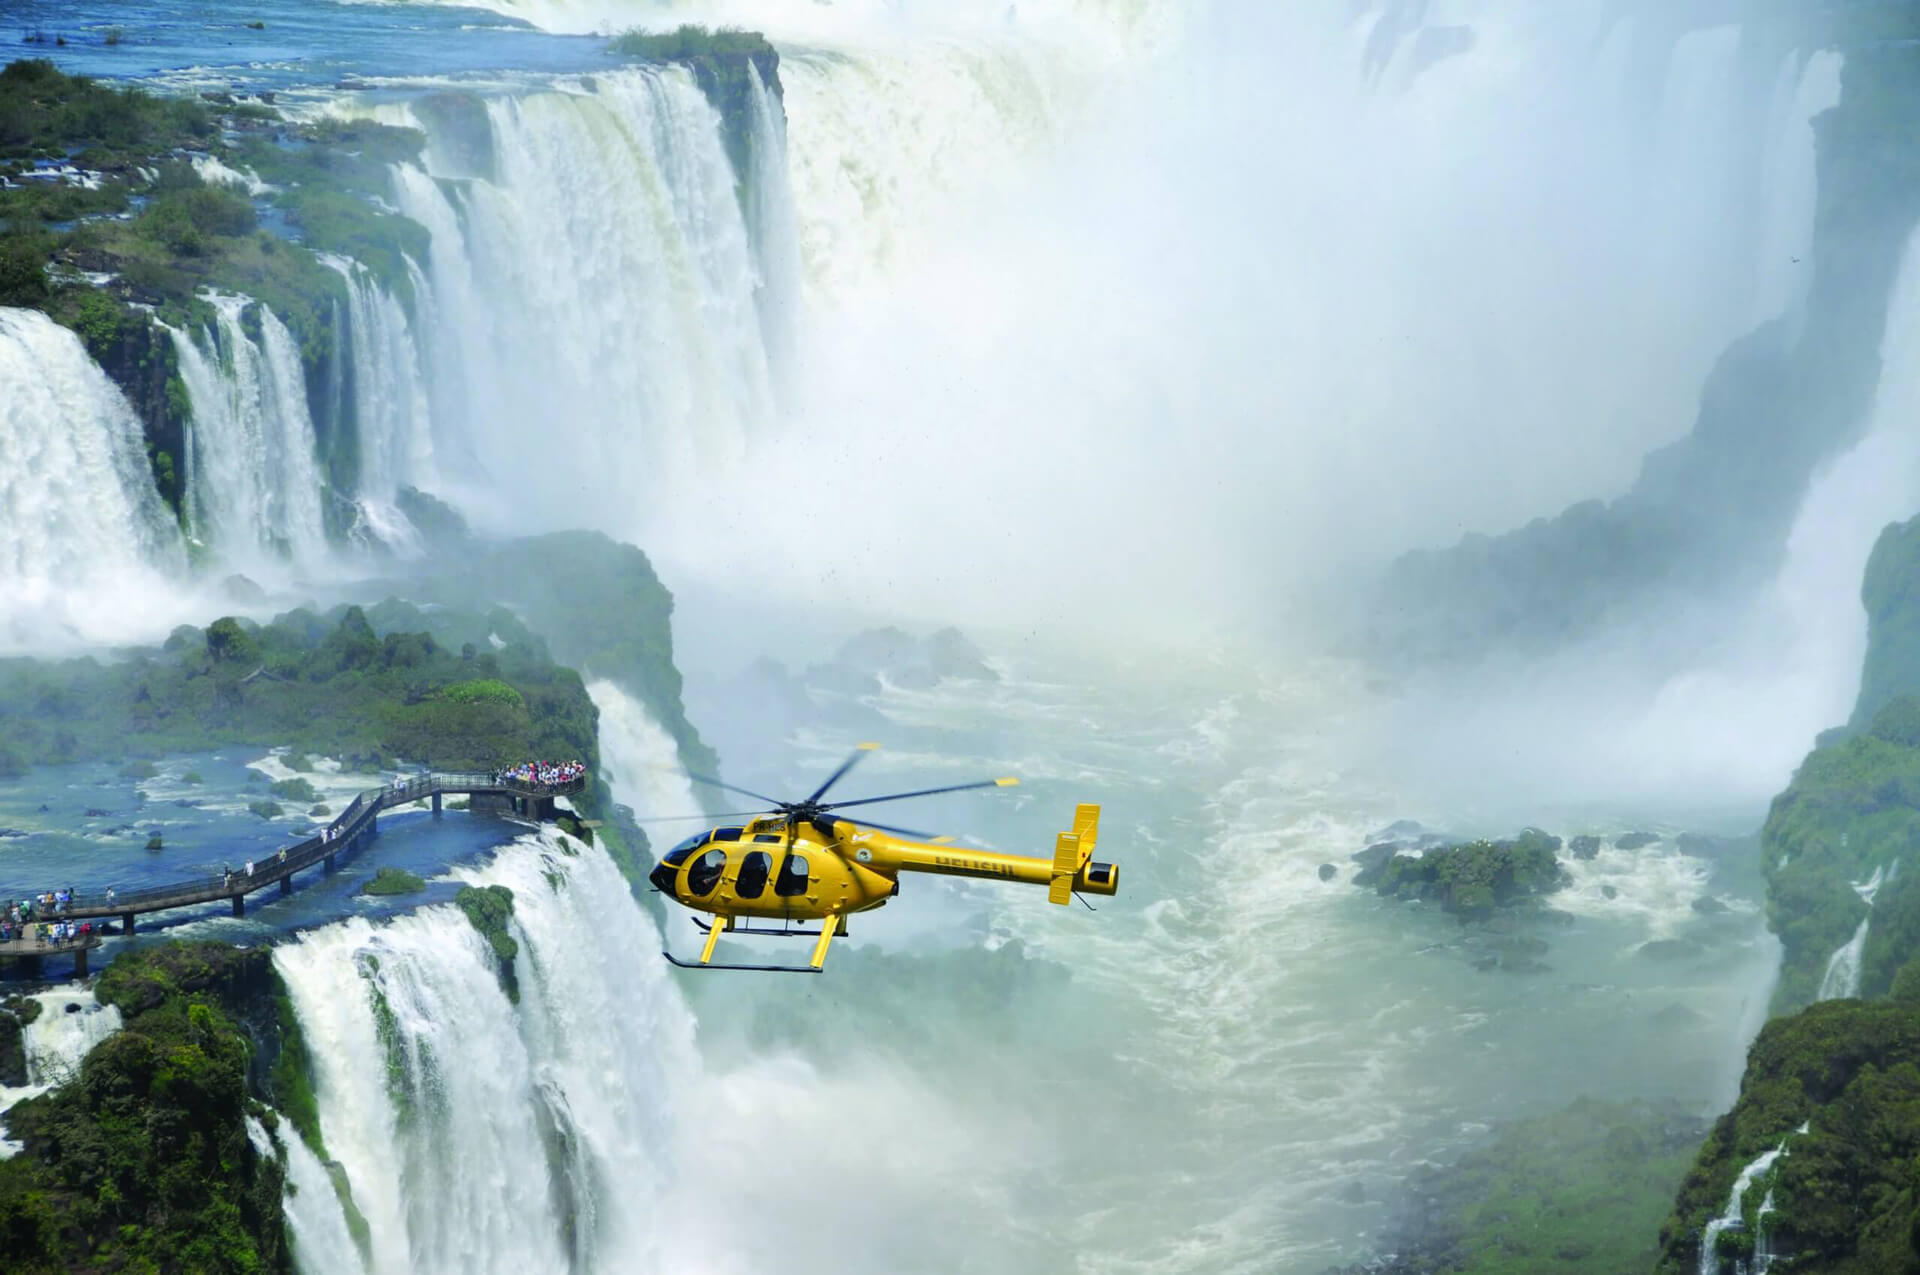 Private helicopter hovers Iguazu Falls and mist during luxury tour